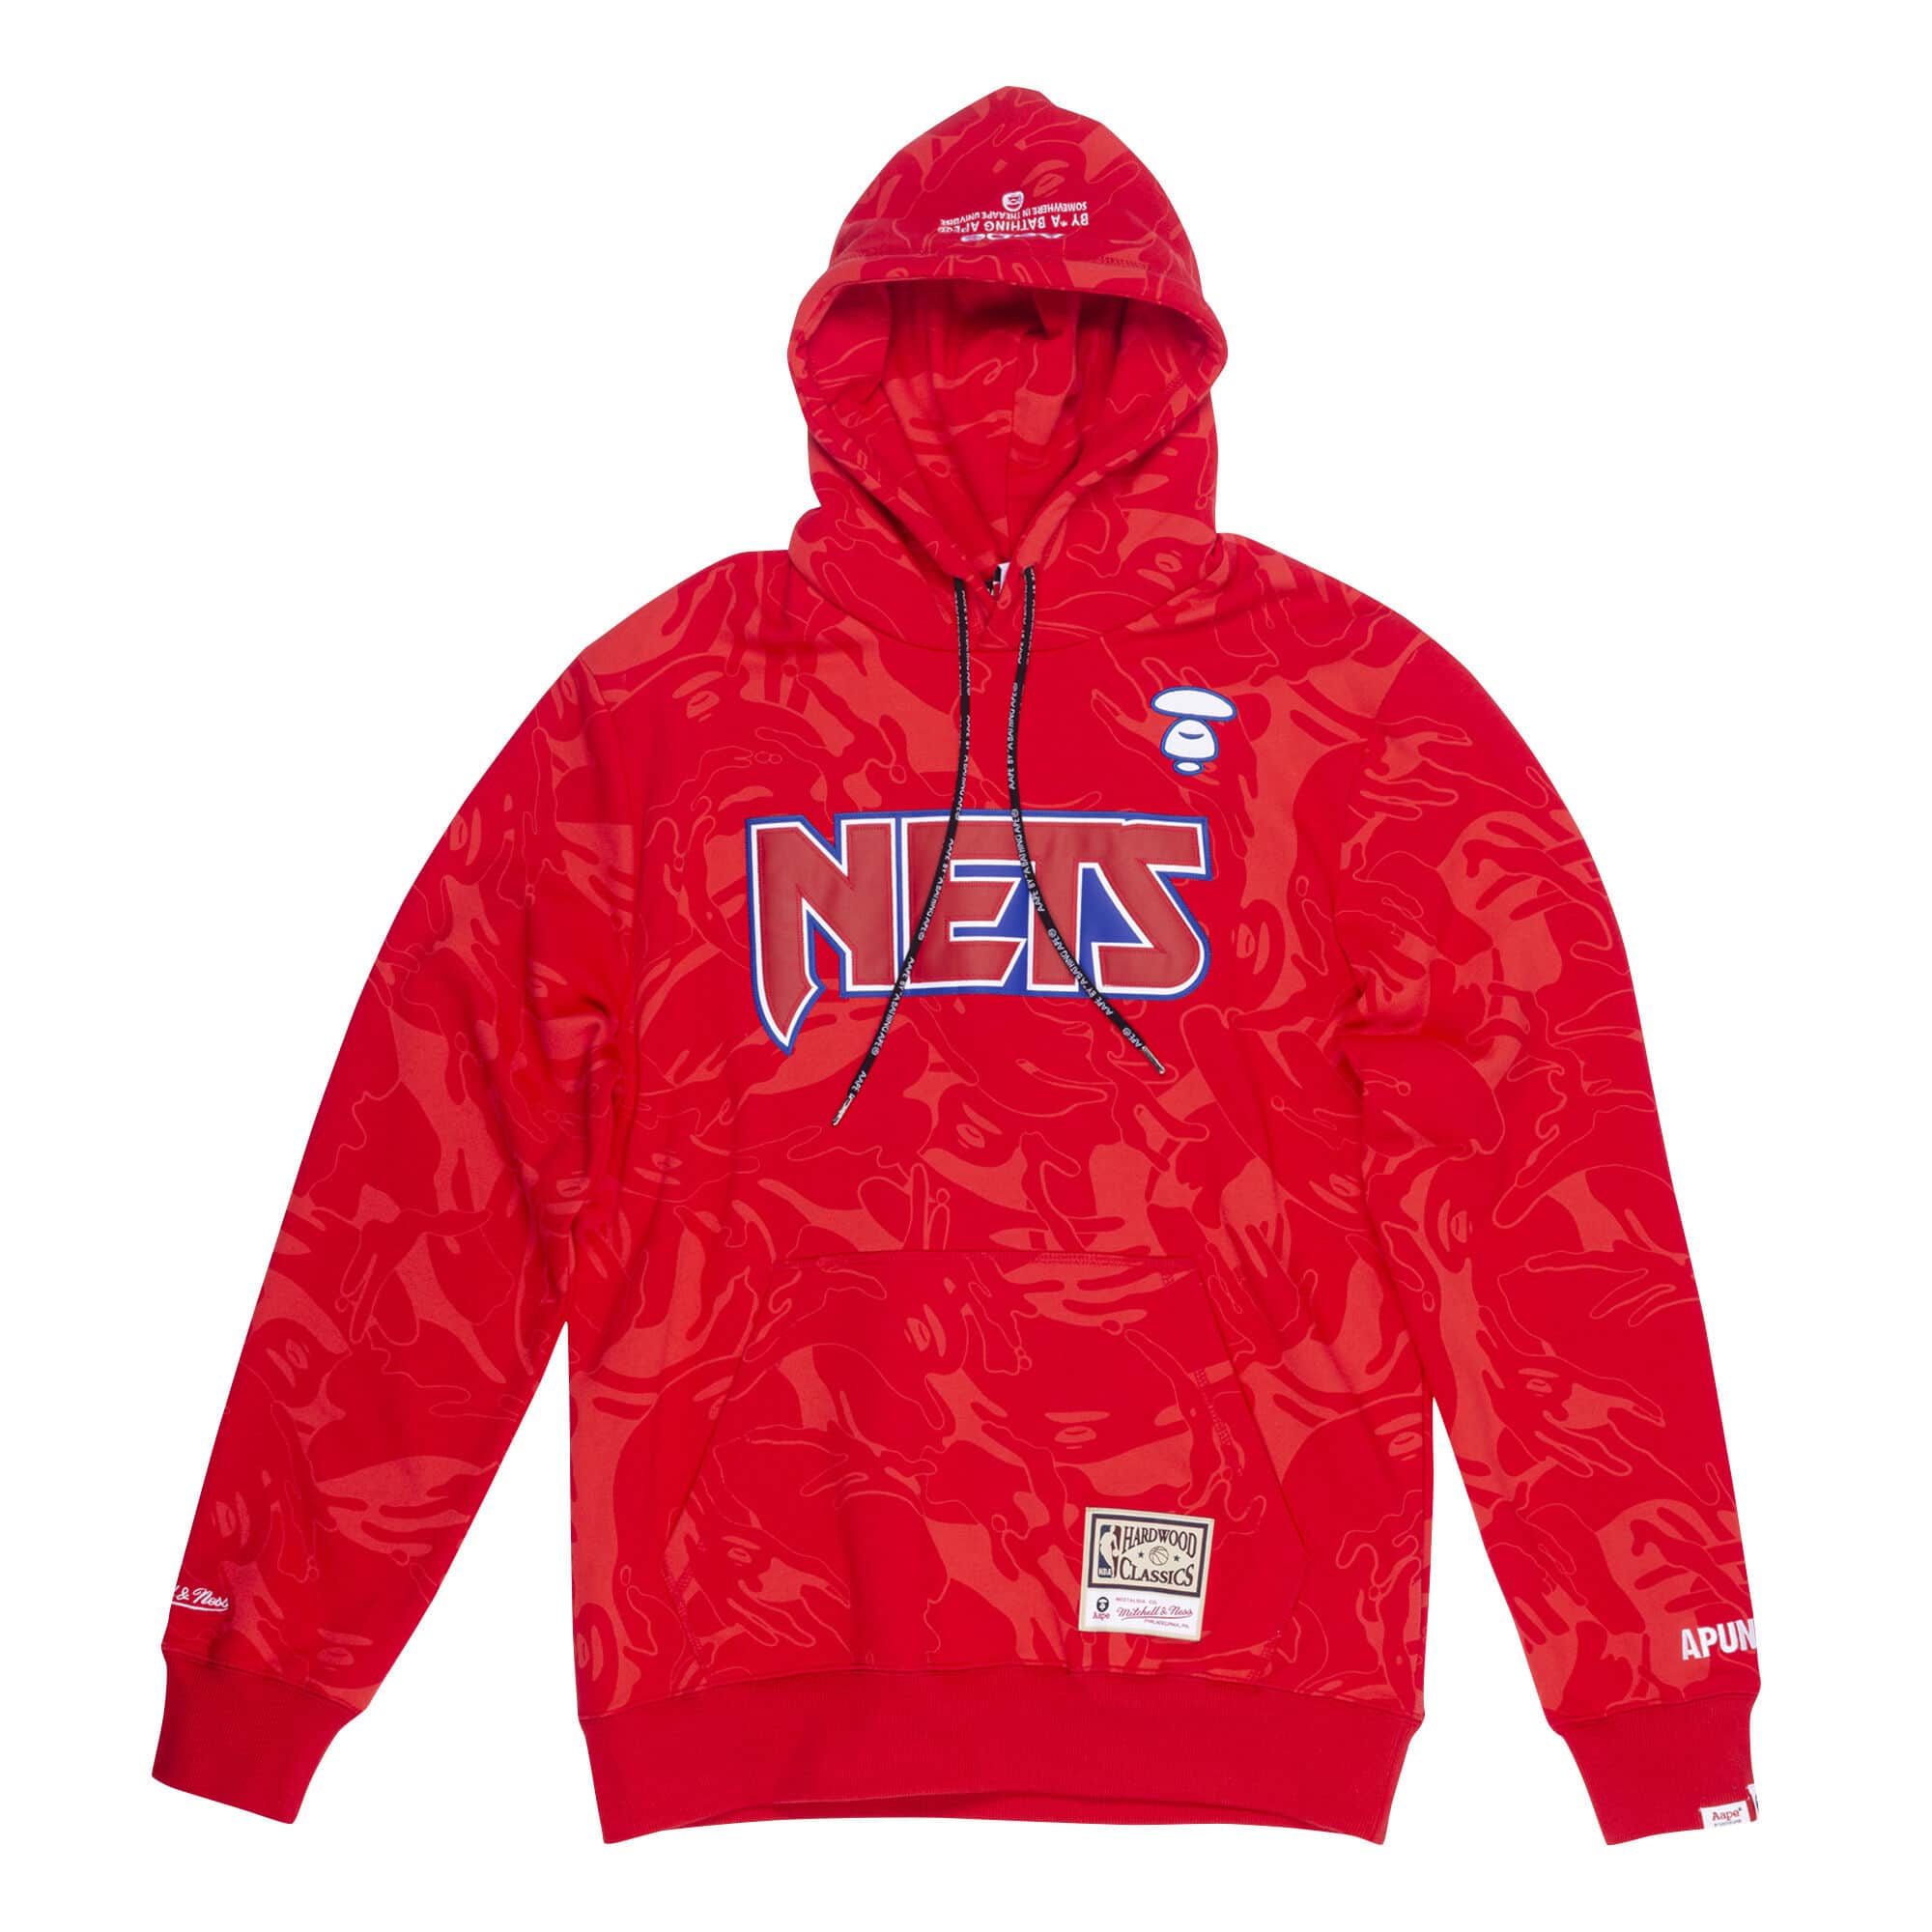 Aape x Mitchell & Ness New Jersey Nets Hoodie Red Men's - SS20 - US